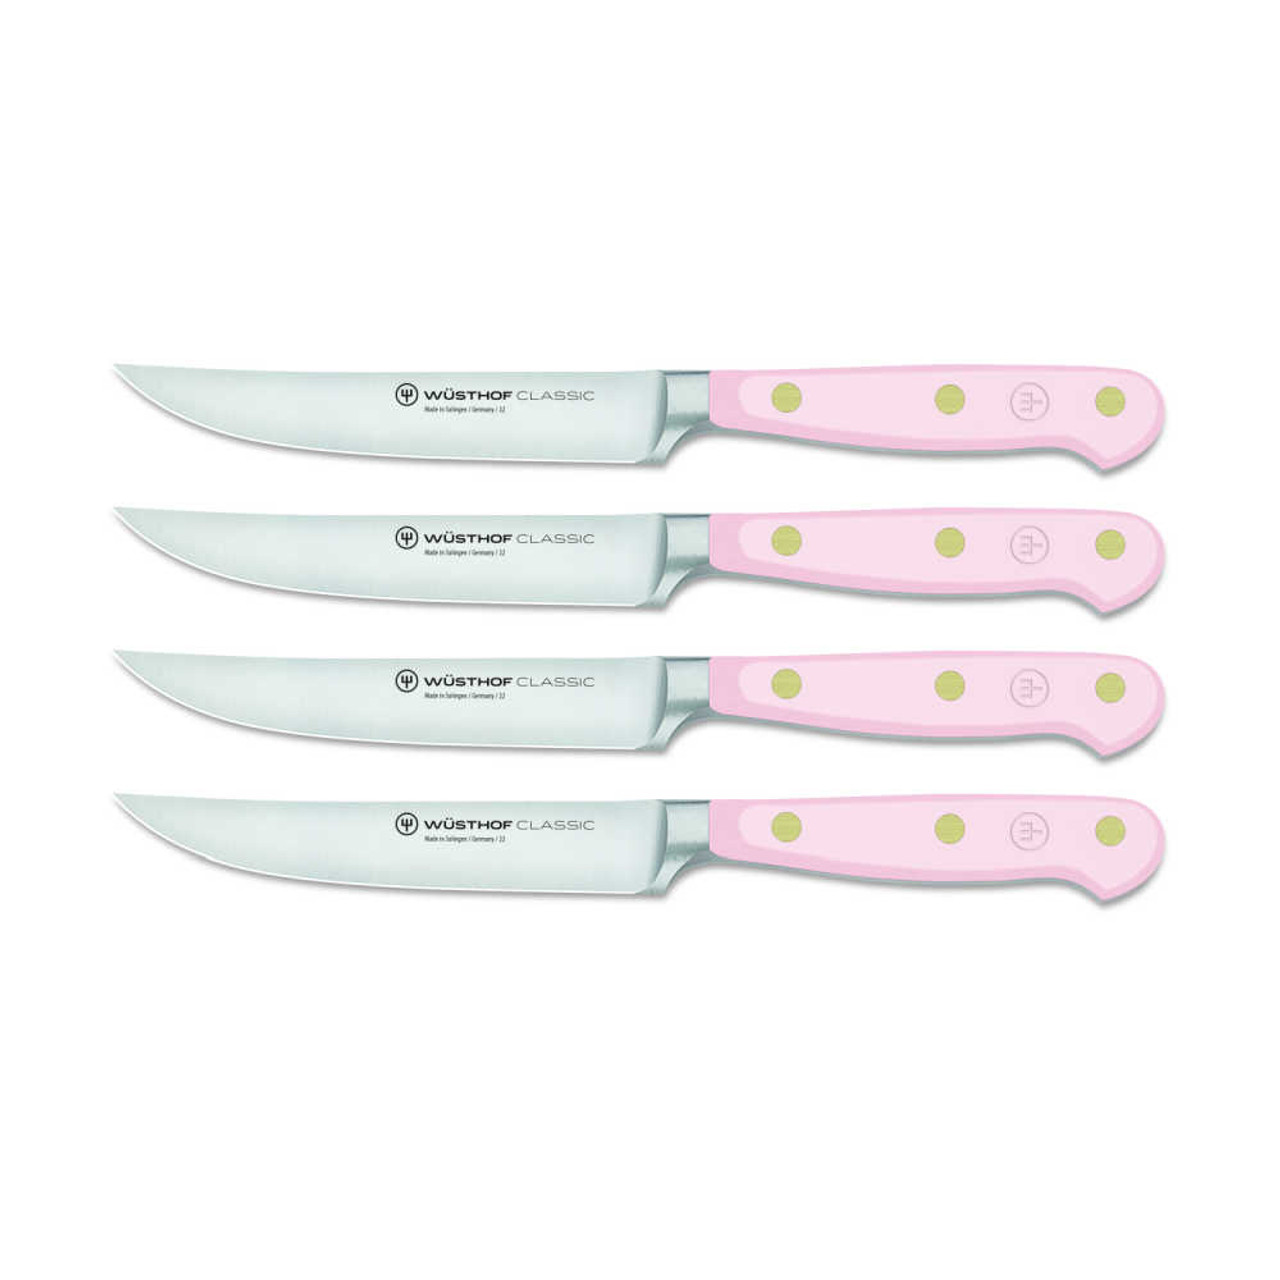 https://cdn11.bigcommerce.com/s-hccytny0od/images/stencil/1280x1280/products/5390/23407/Wusthof_Classic_Color_4-Piece_Steak_Knife_Set_Pink_Himalayan_Salt__04791.1682004901.jpg?c=2?imbypass=on